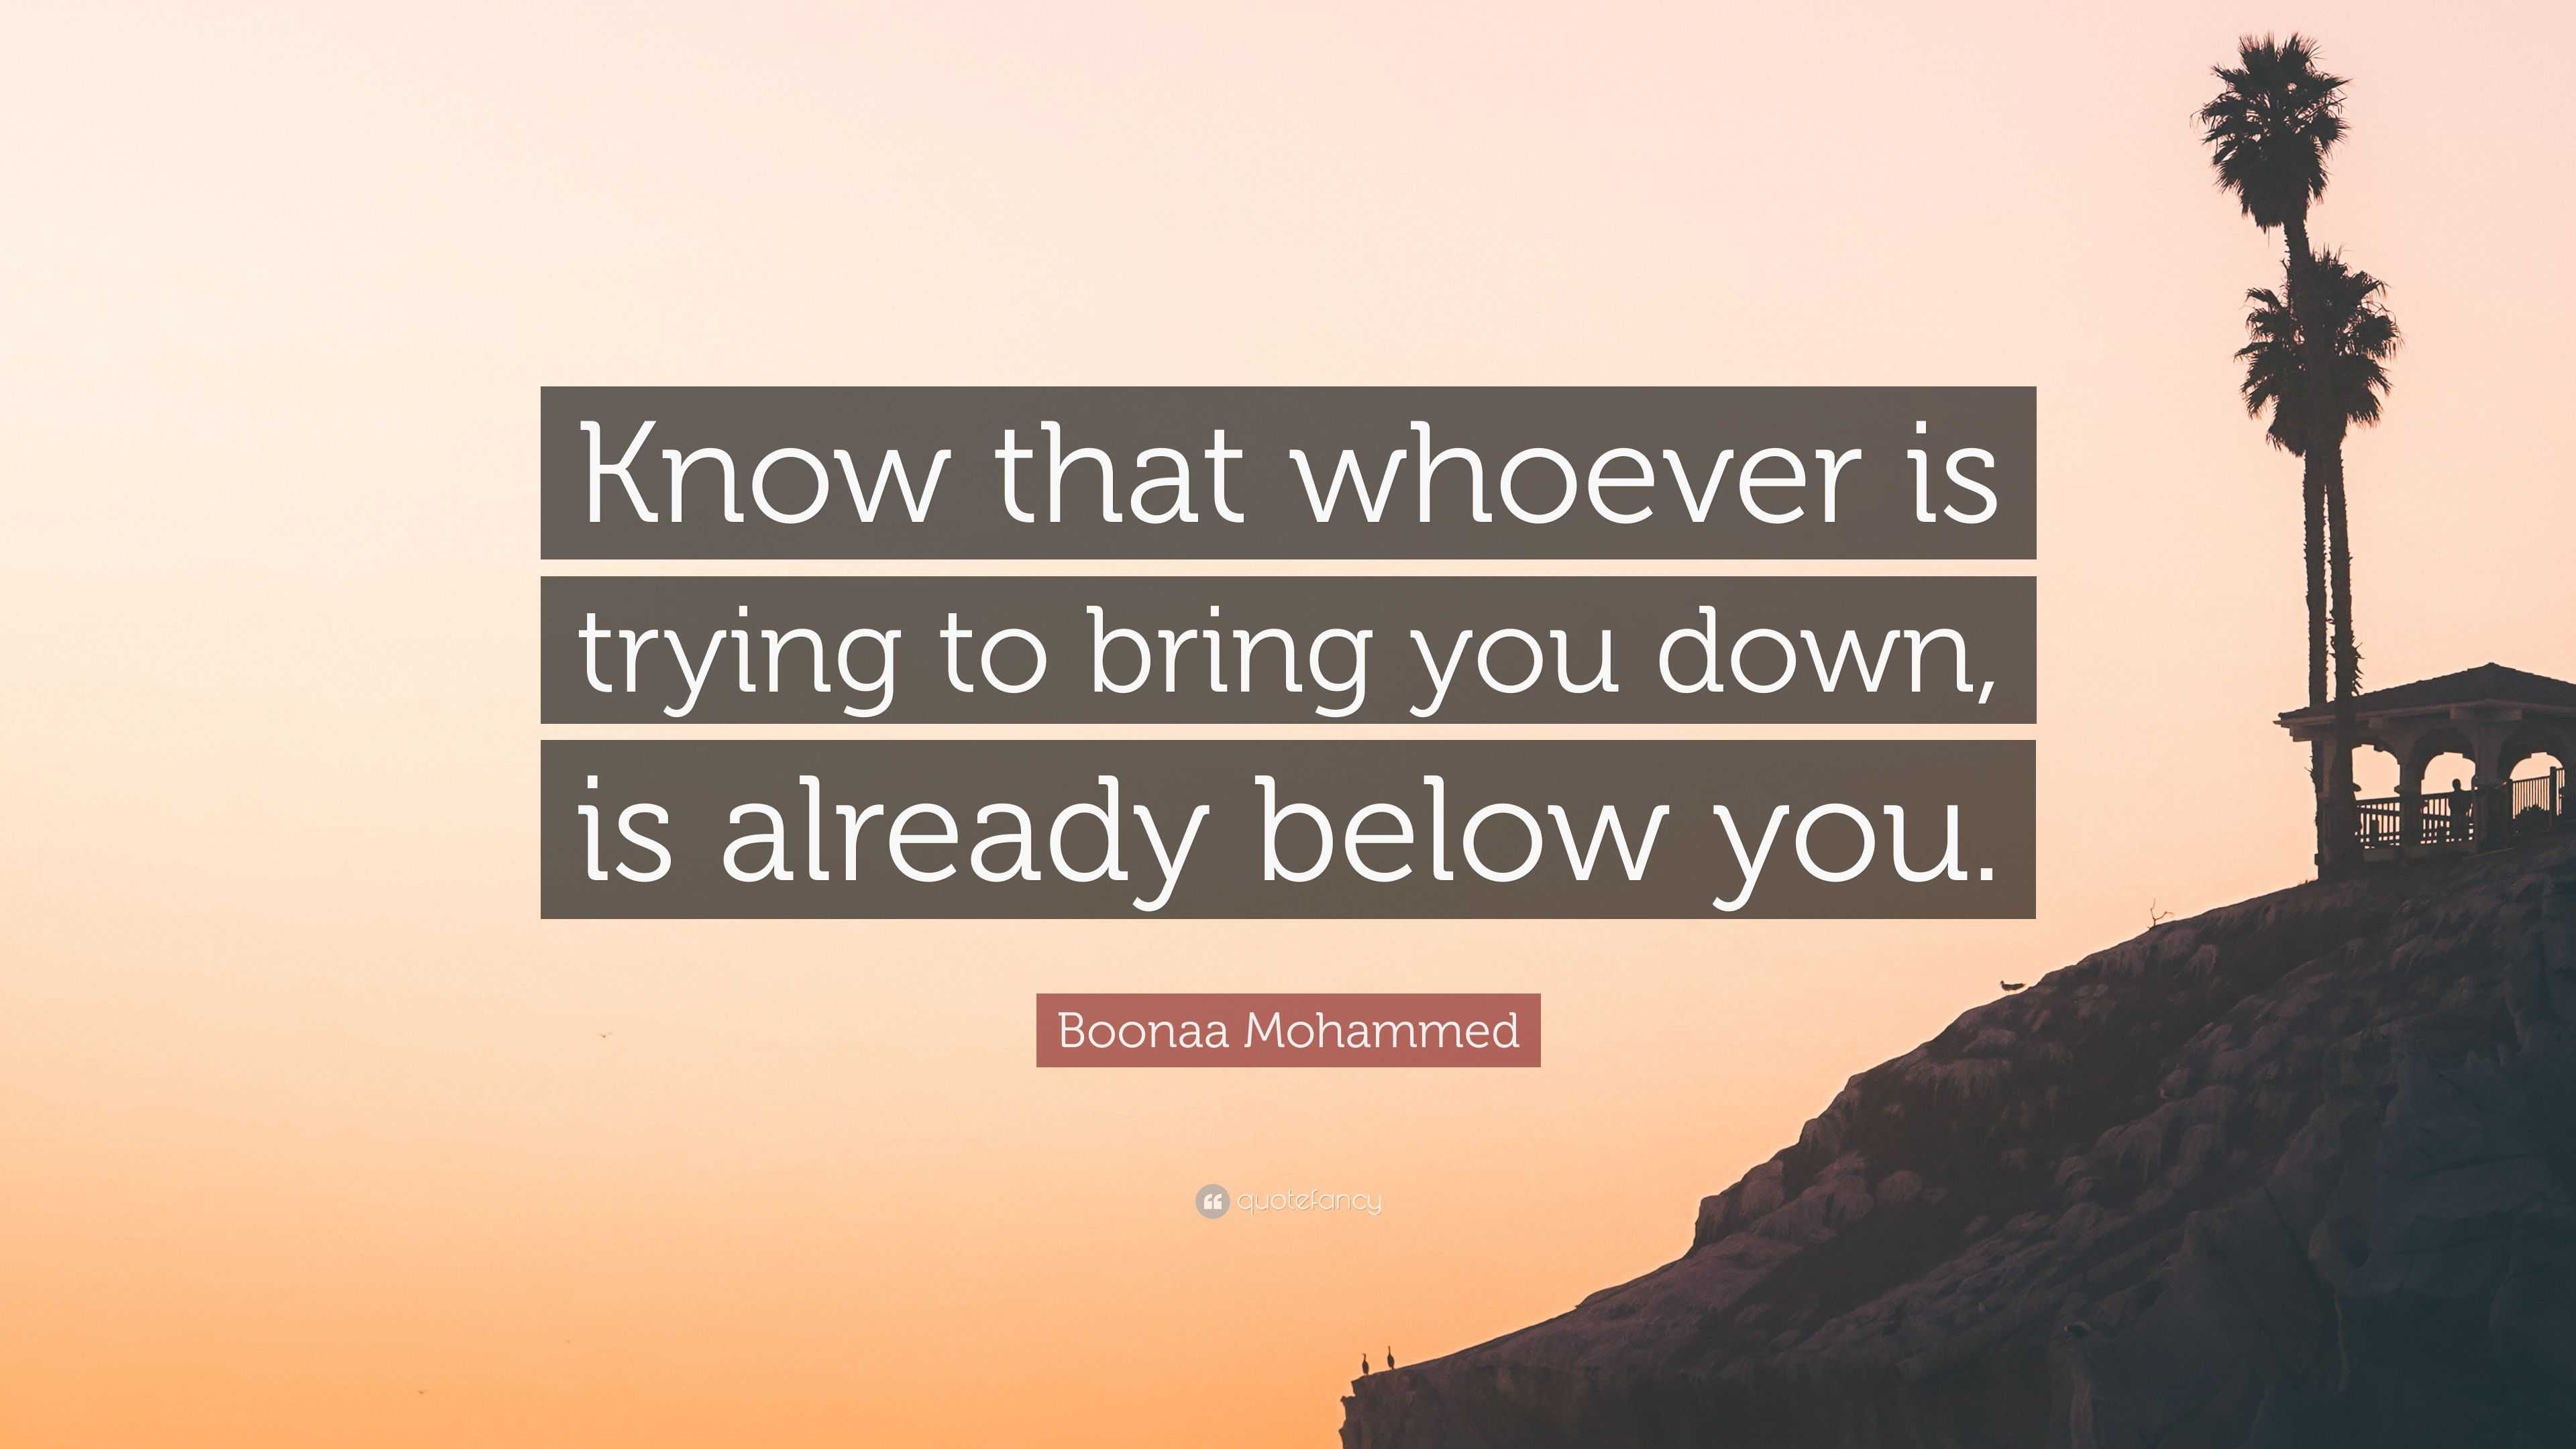 Boonaa Mohammed Quote “know That Whoever Is Trying To Bring You Down Is Already Below You” 